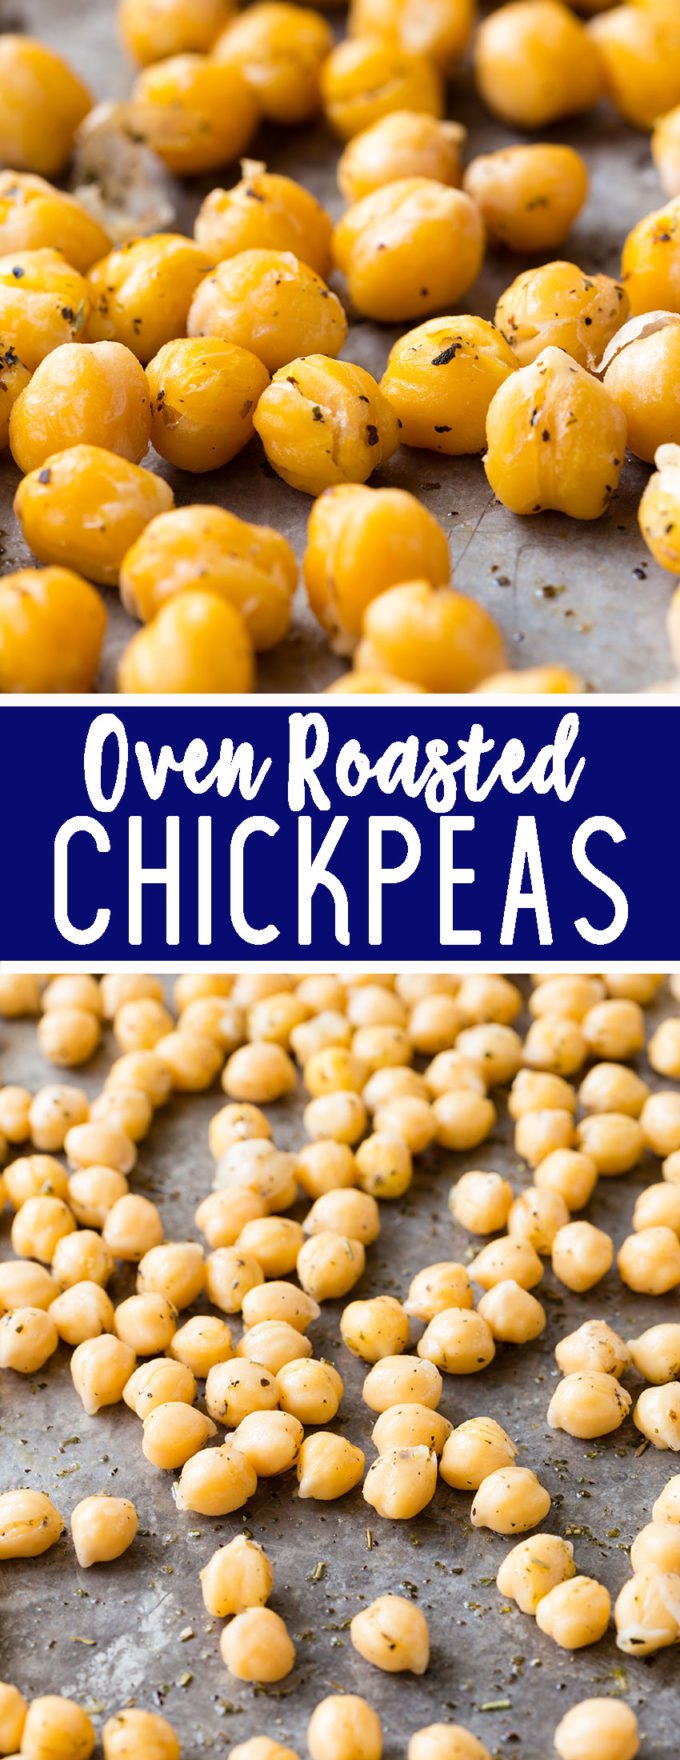 Delicious oven roasted chickpeas, perfect for snacking or adding to salads and bowls